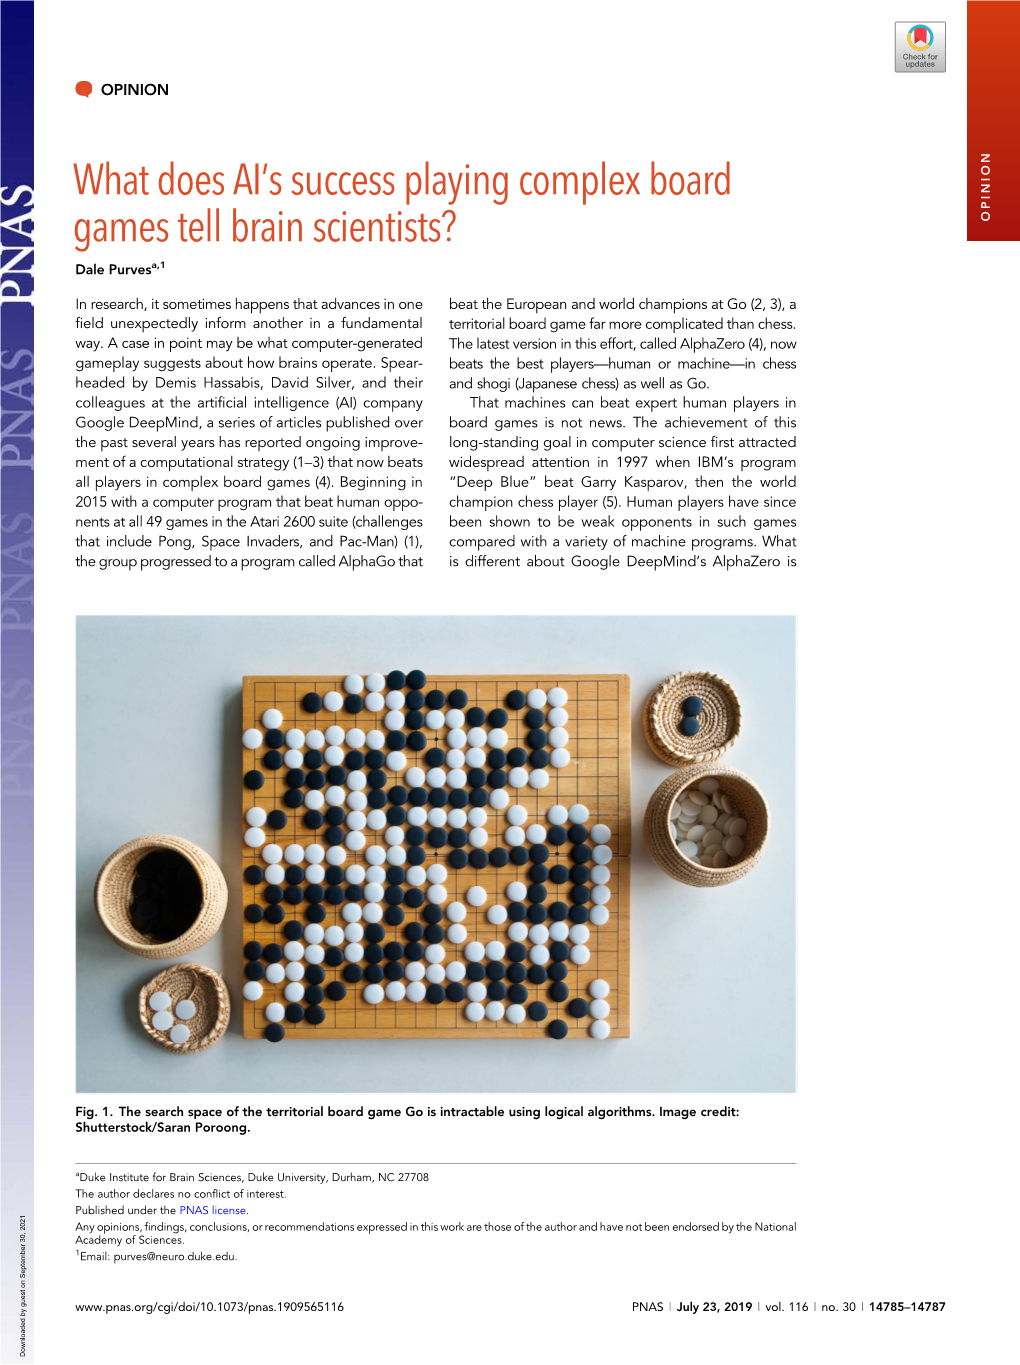 What Does AI's Success Playing Complex Board Games Tell